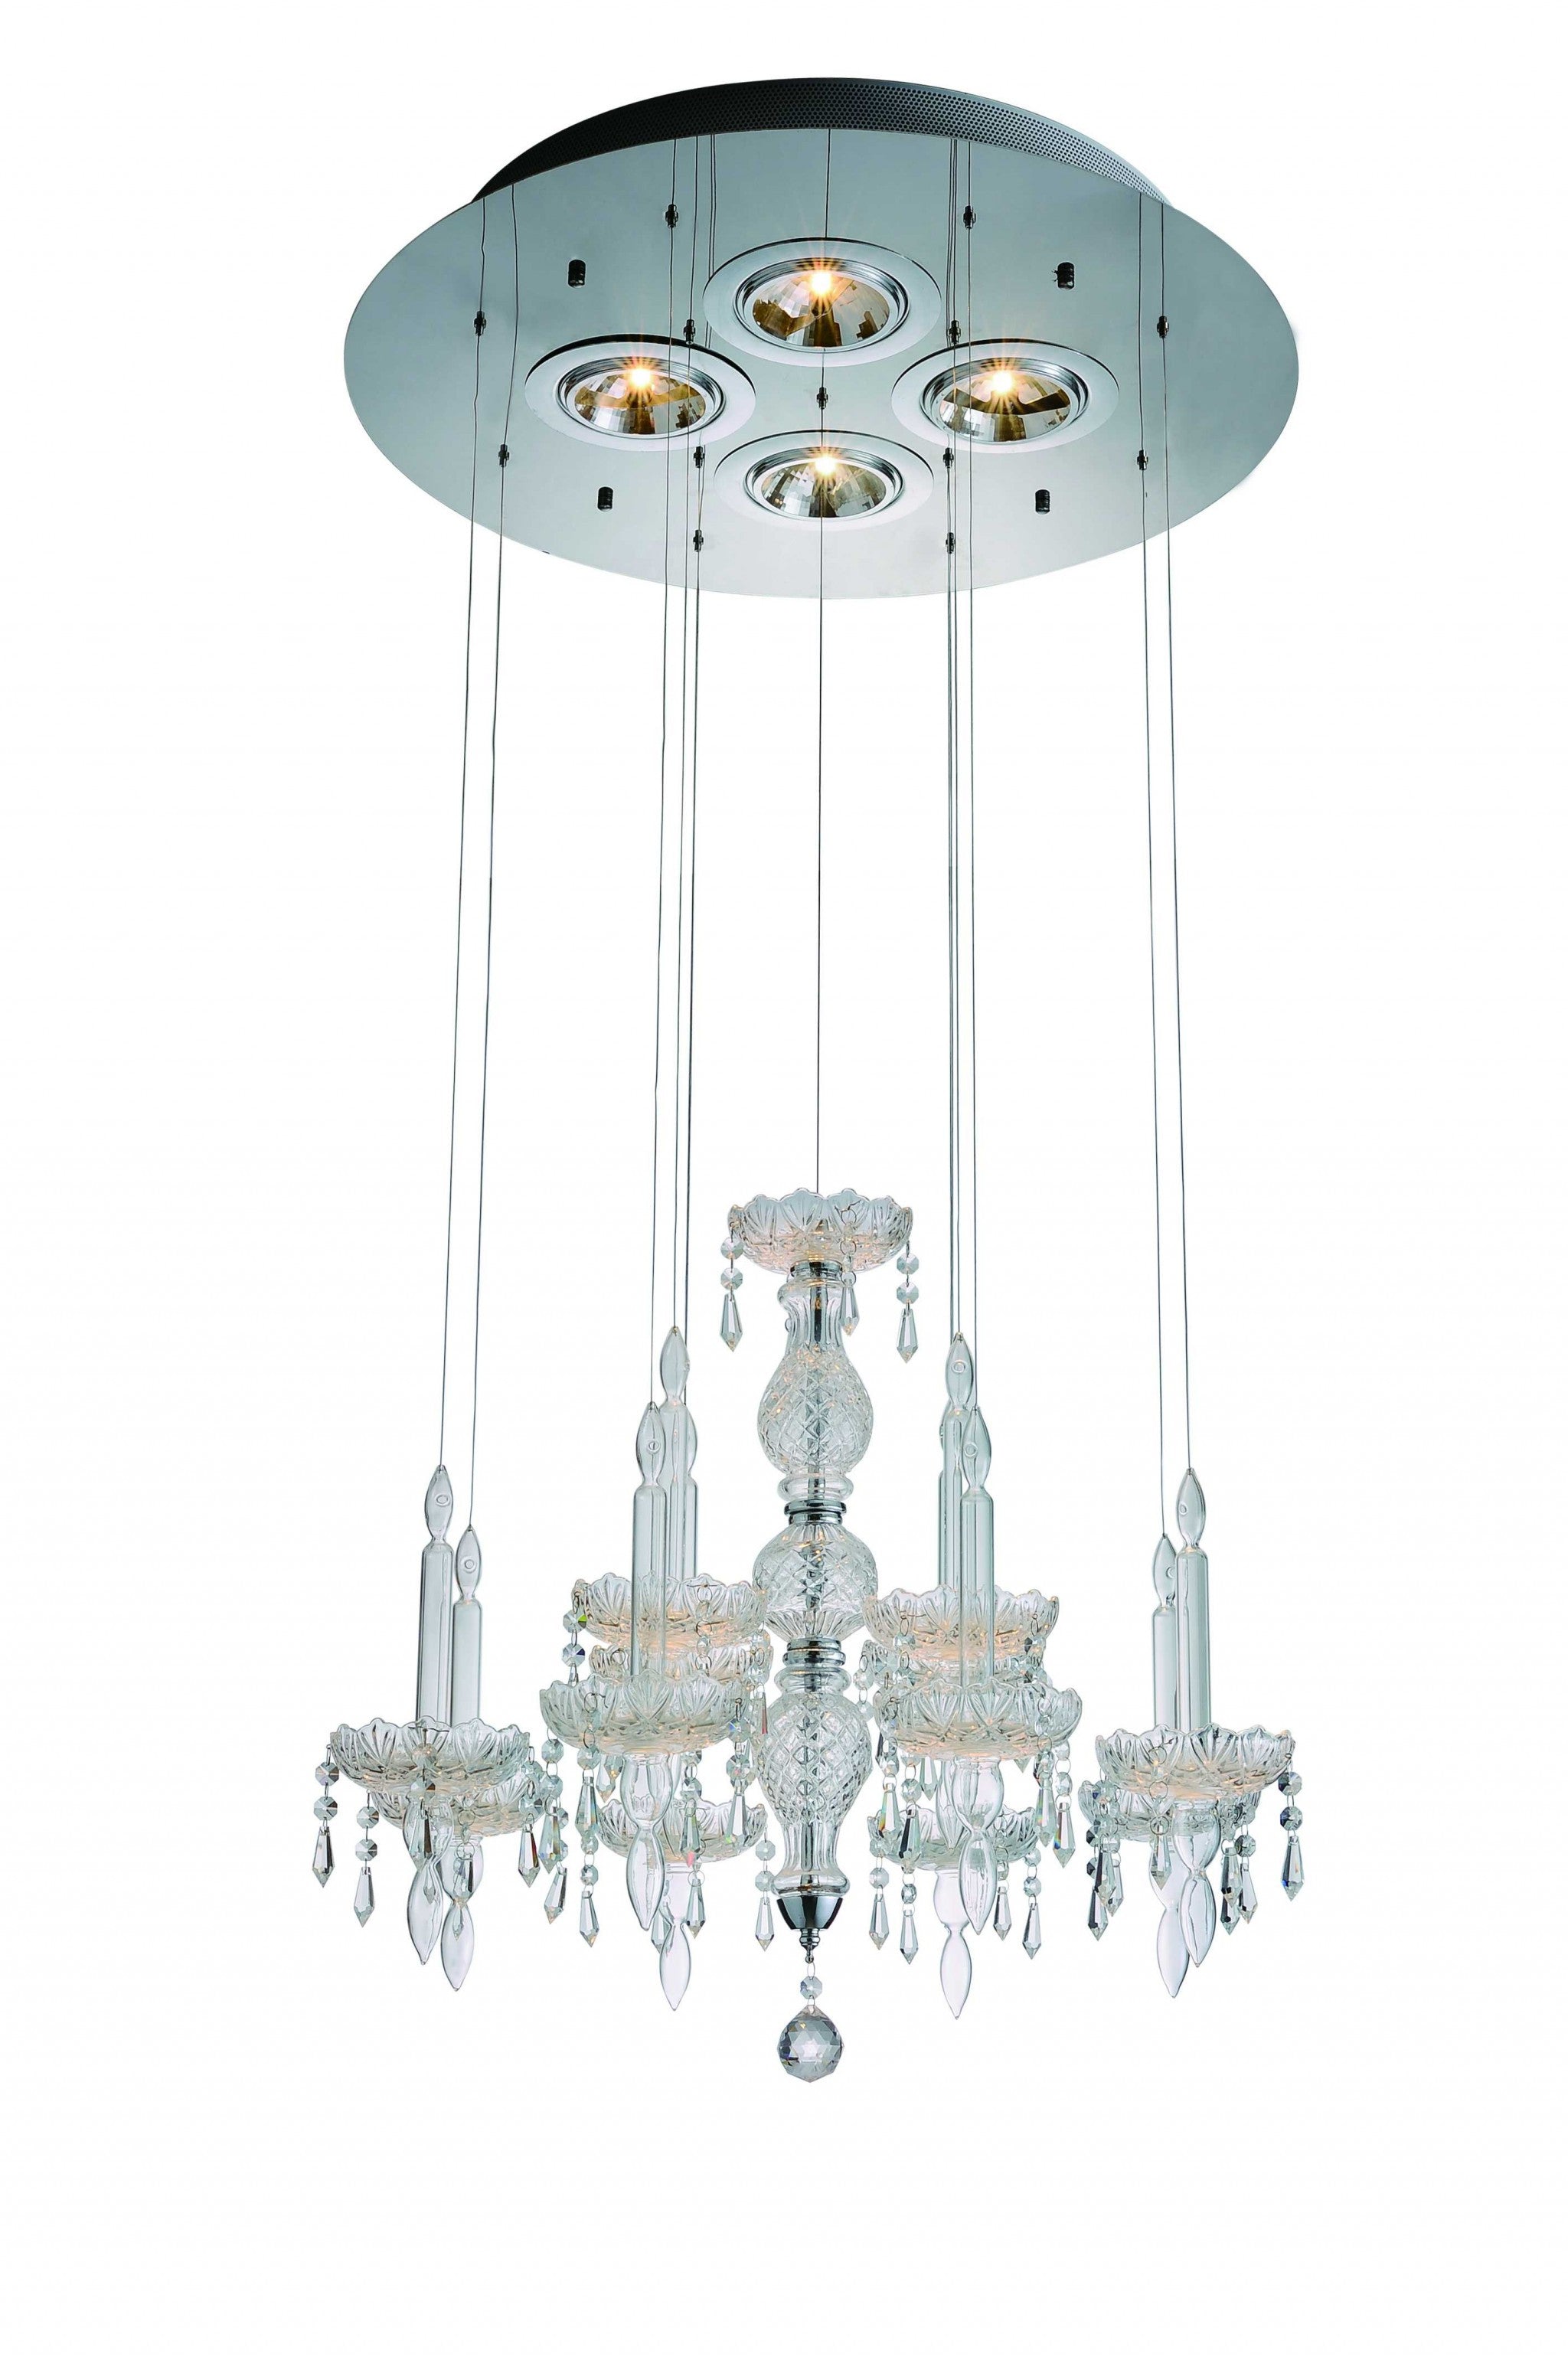 26 X 26 X 43 Clear Crystal Glass Pendant Lamp